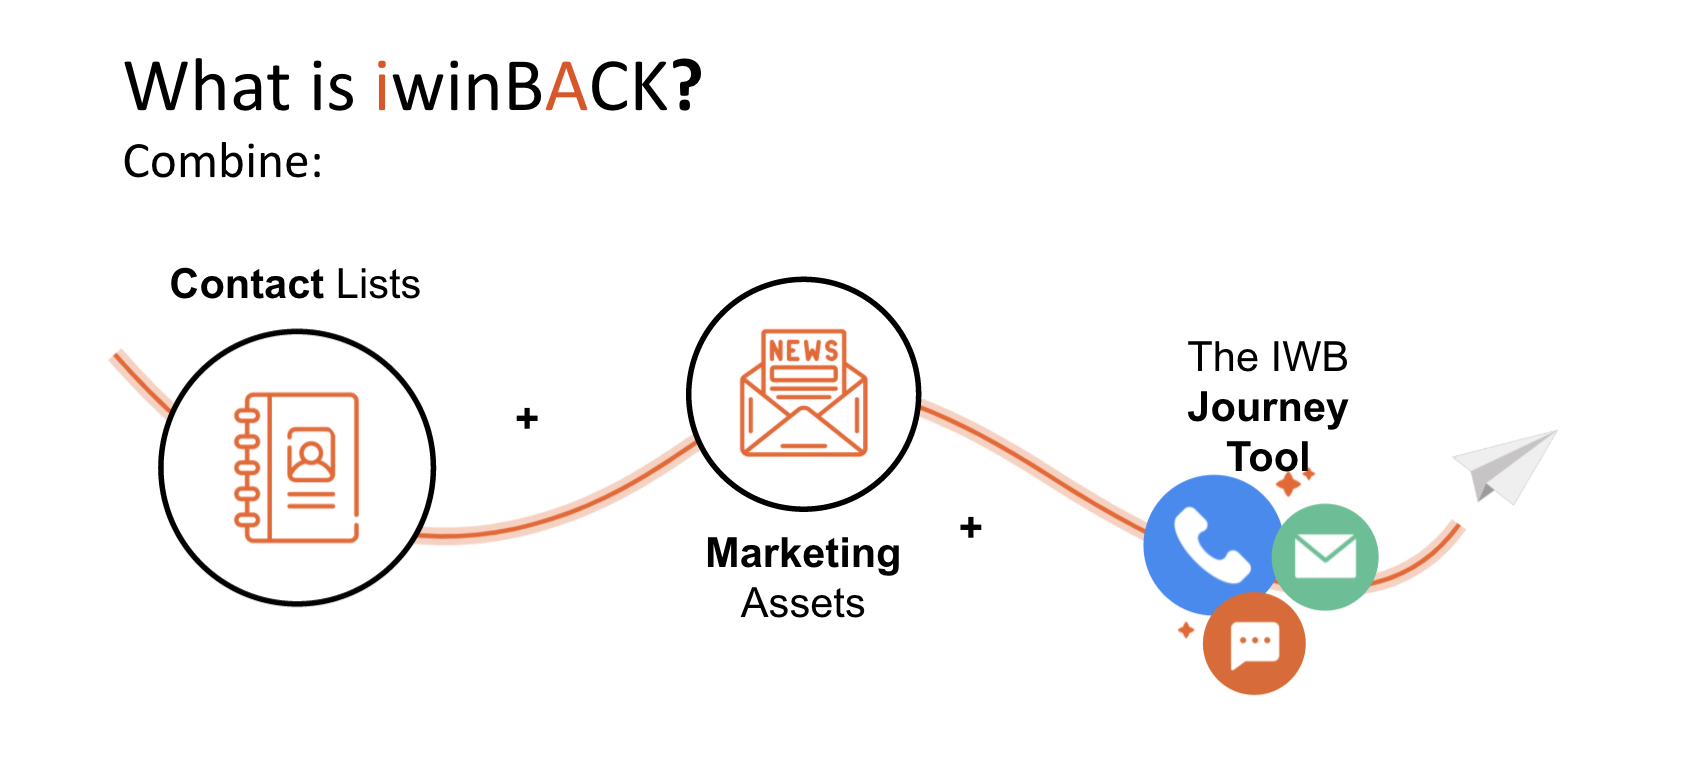 What is iwinBACK?